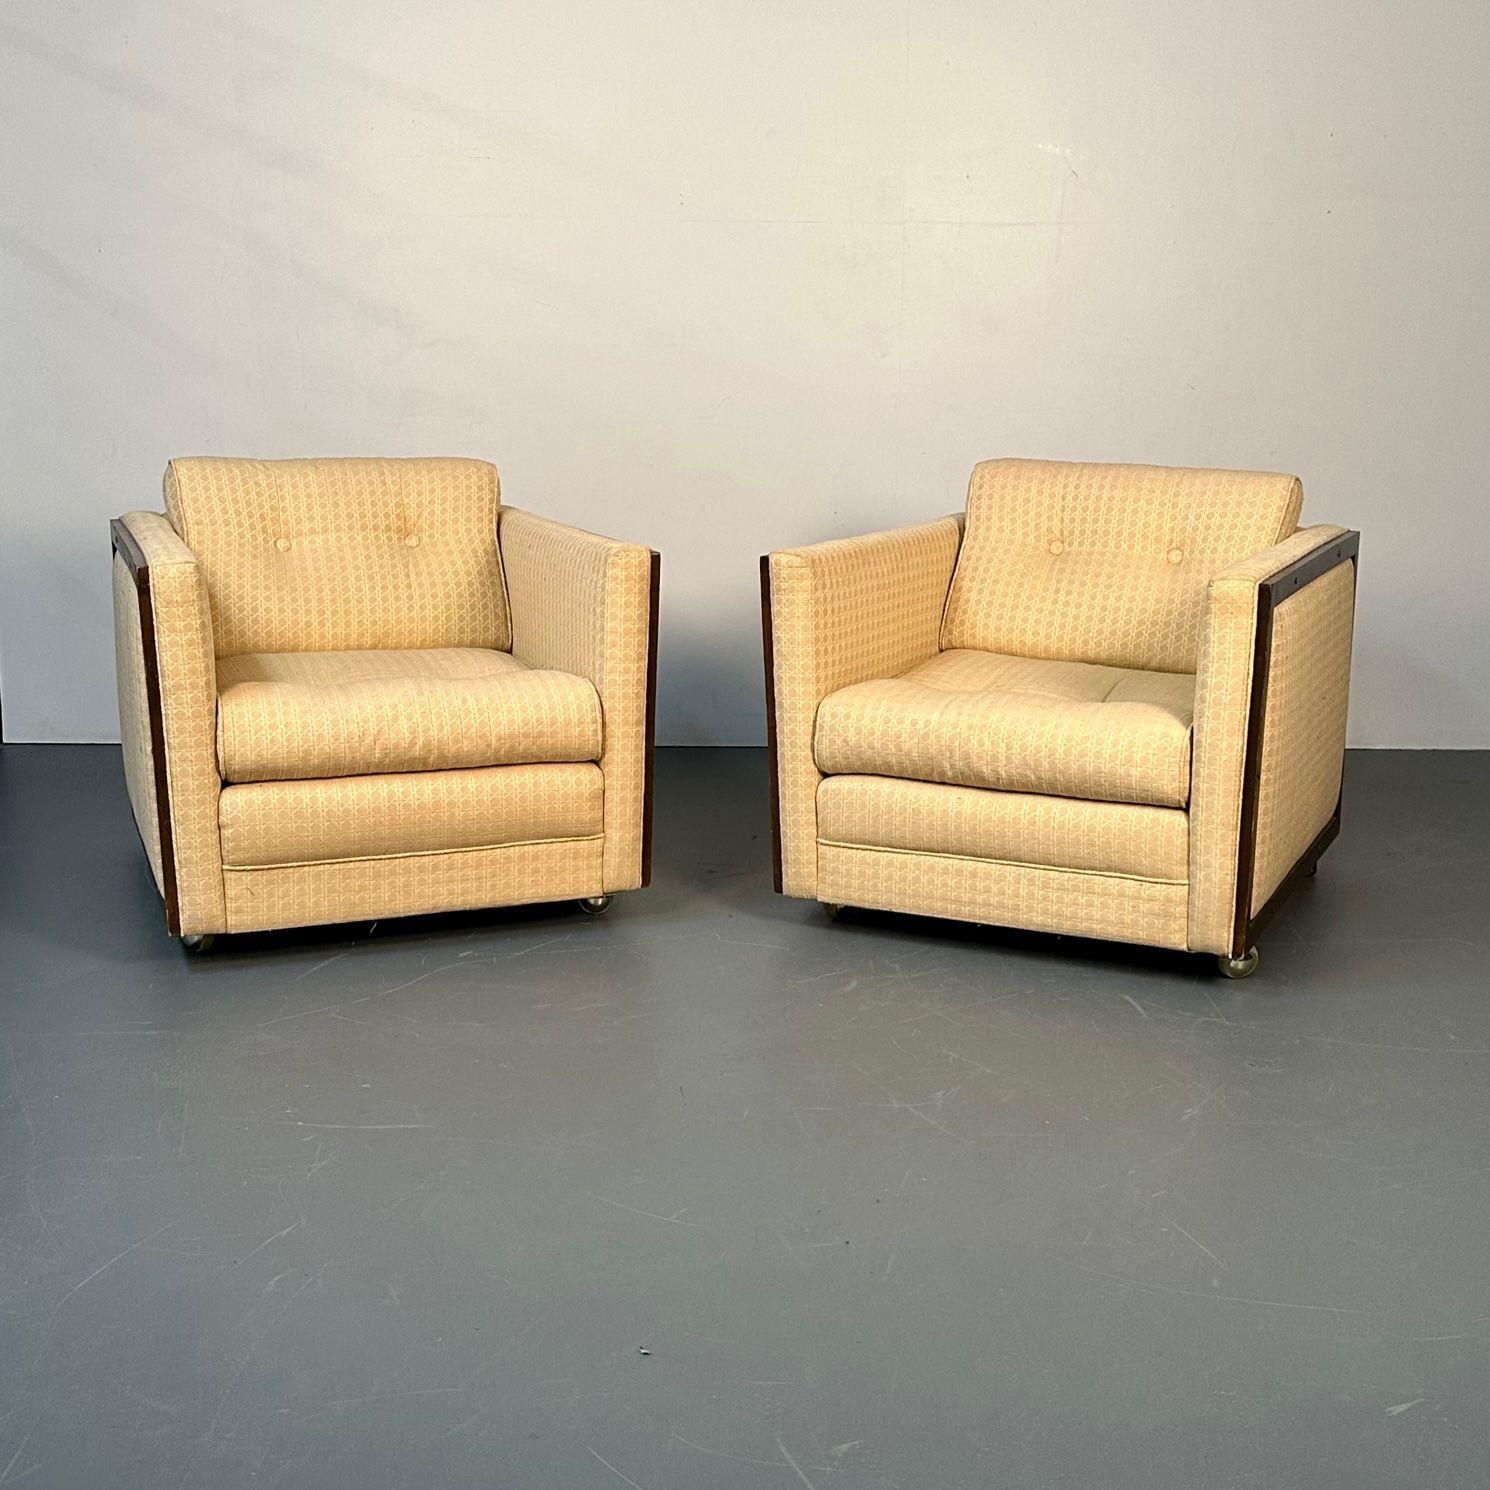 Pair Mid-Century Modern Lounge / Club Chairs, George Nelson Style, Box-Form In Good Condition For Sale In Stamford, CT